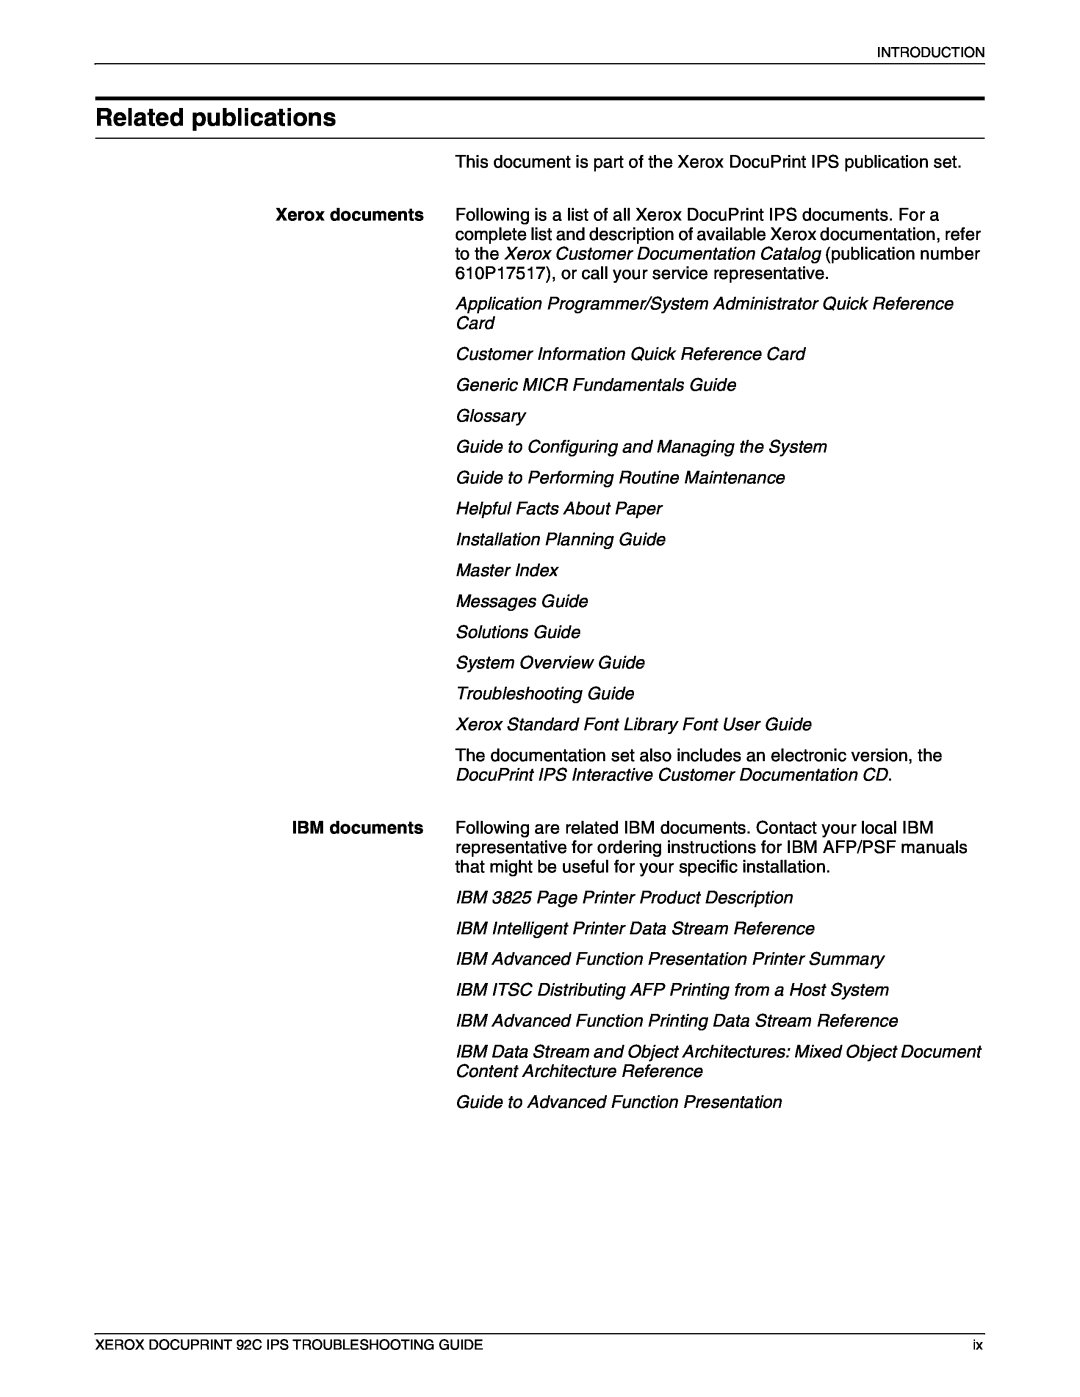 Xerox 92C IPS manual Related publications, Application Programmer/System Administrator Quick Reference Card 